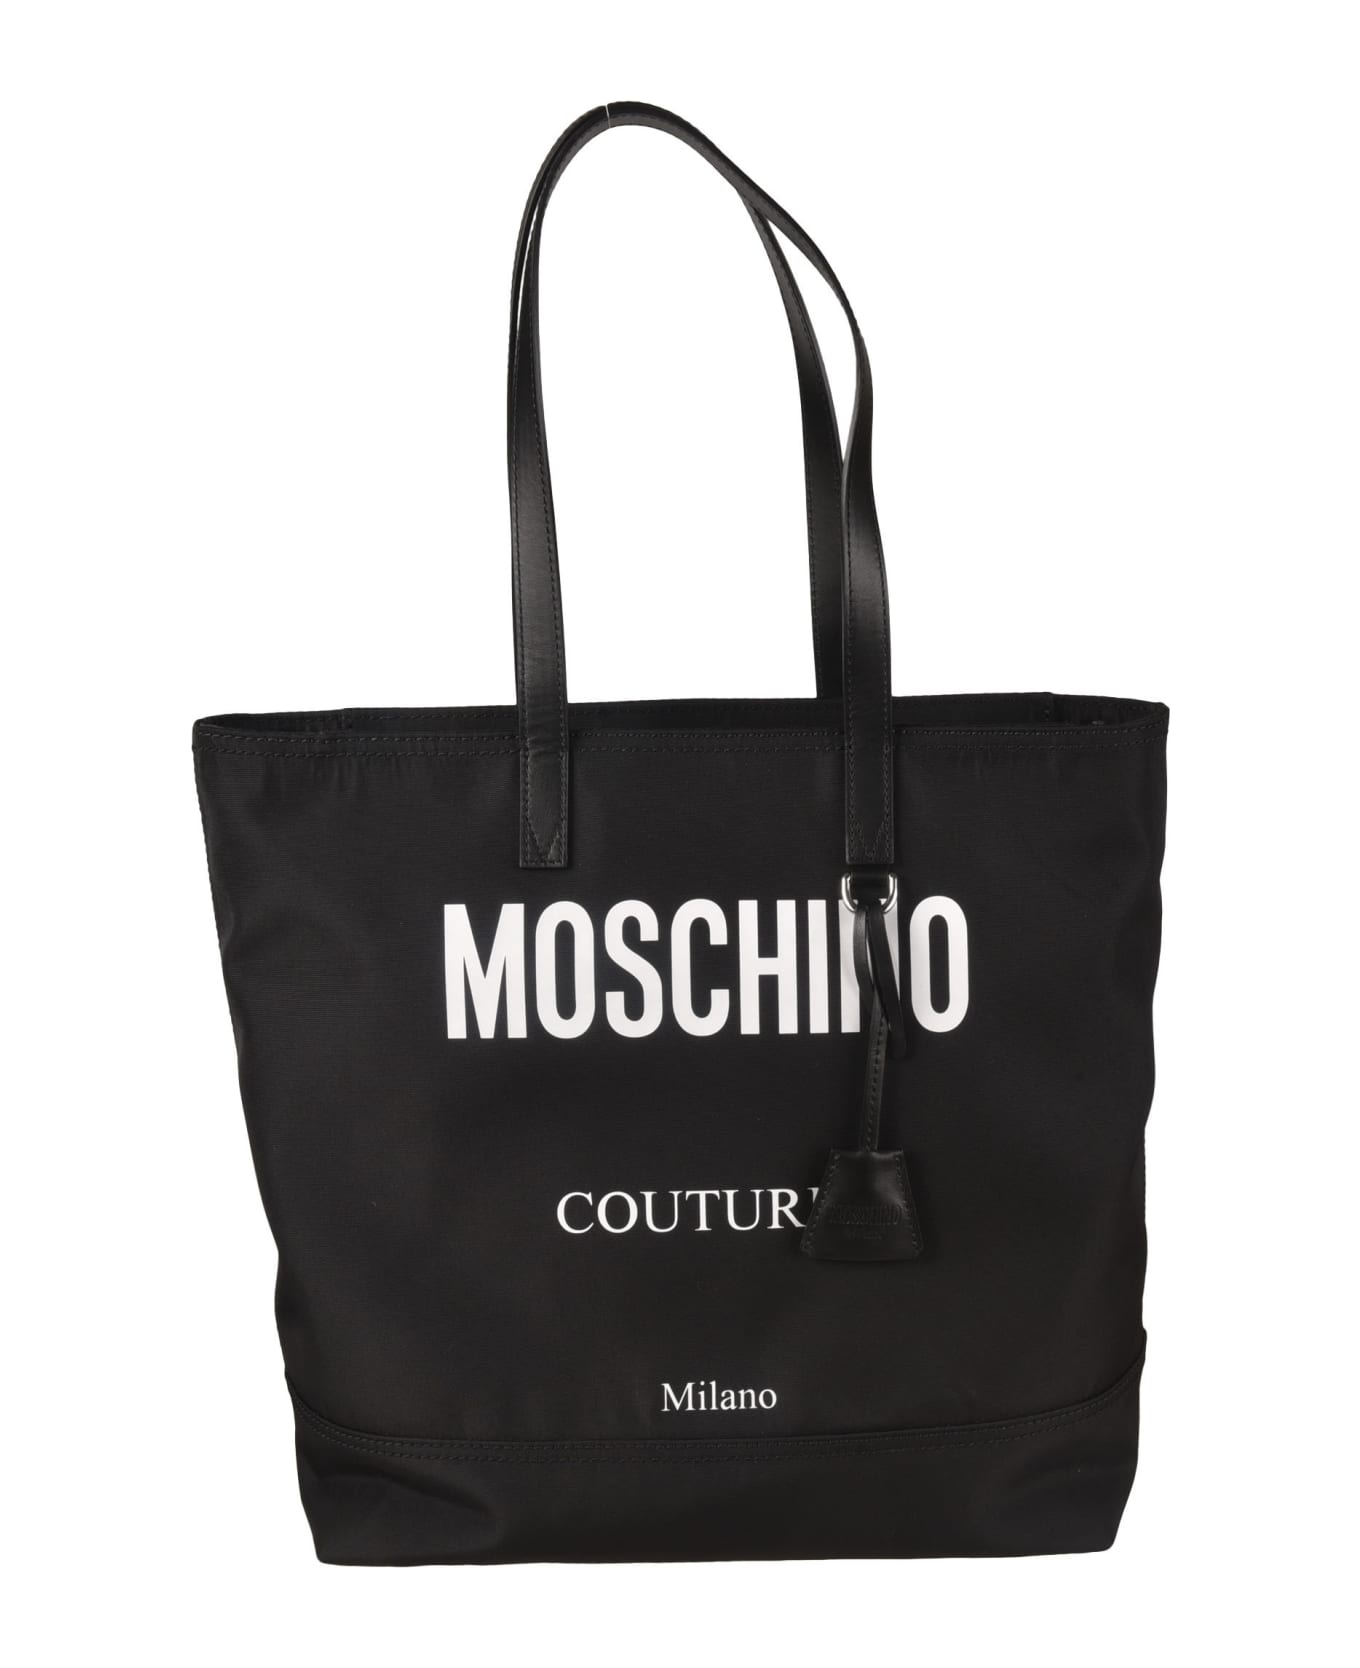 Moschino Couture Logo Print Tote - 2555 トートバッグ